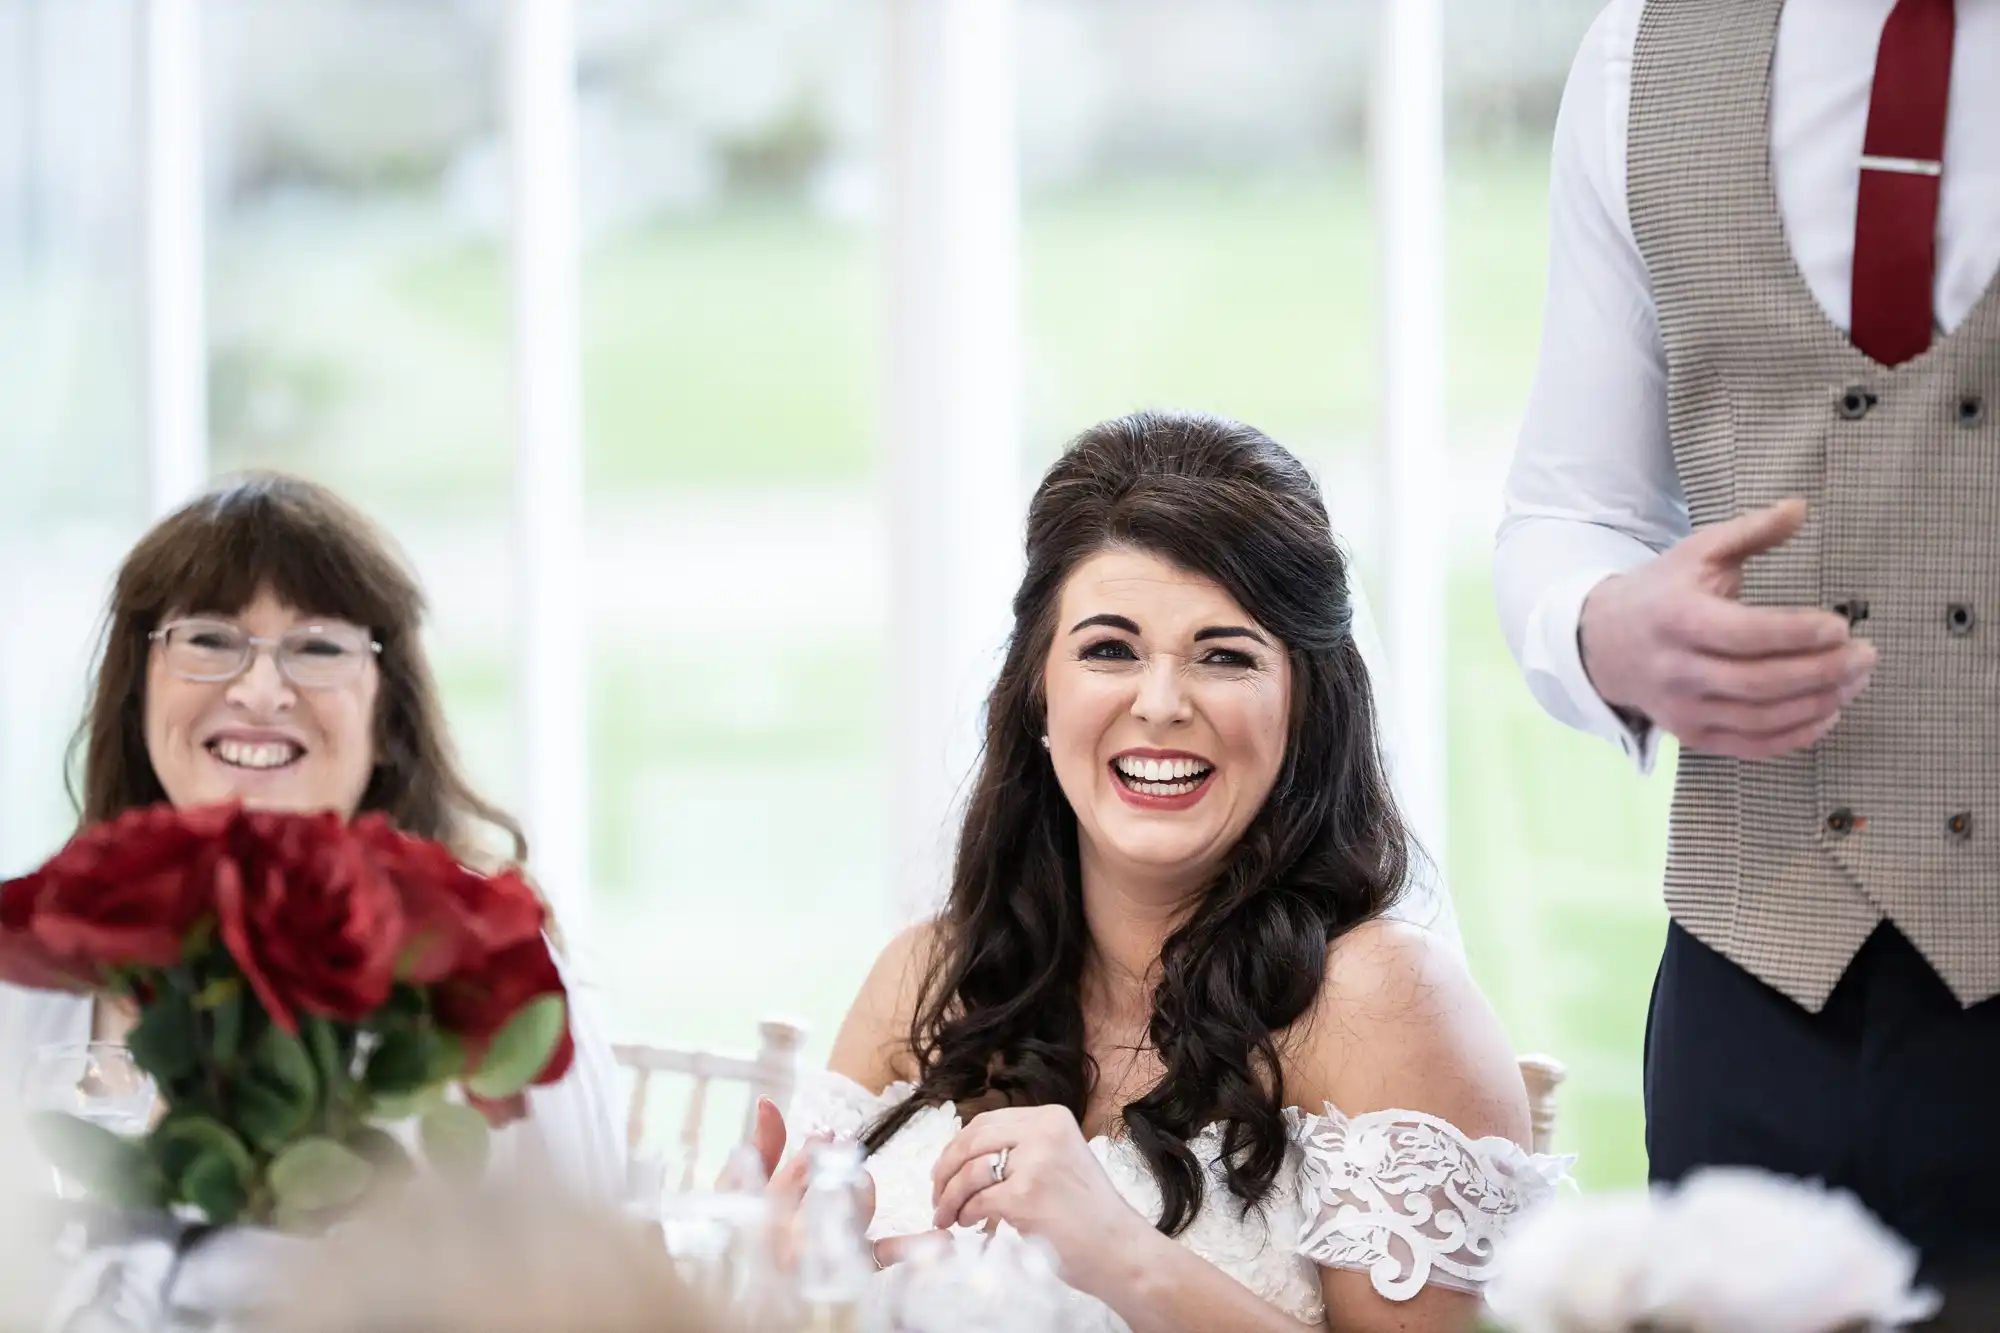 A bride smiles while seated next to a woman holding red flowers, as a man in a vest and tie stands beside them during a wedding reception.